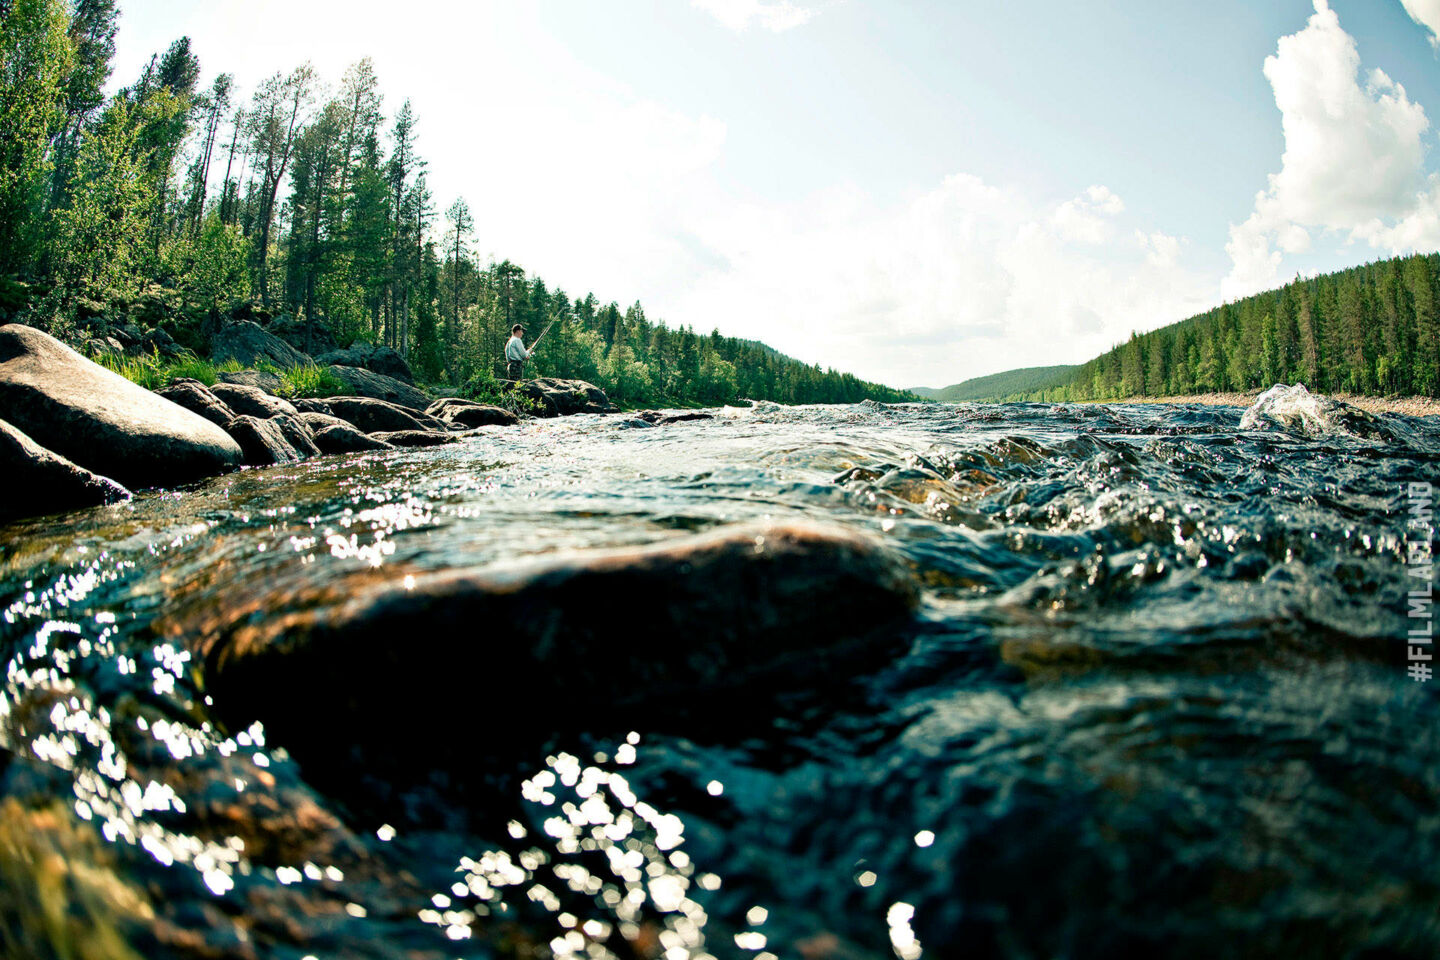 Rivers and lakes, a feature of Finnish Lapland filming locations